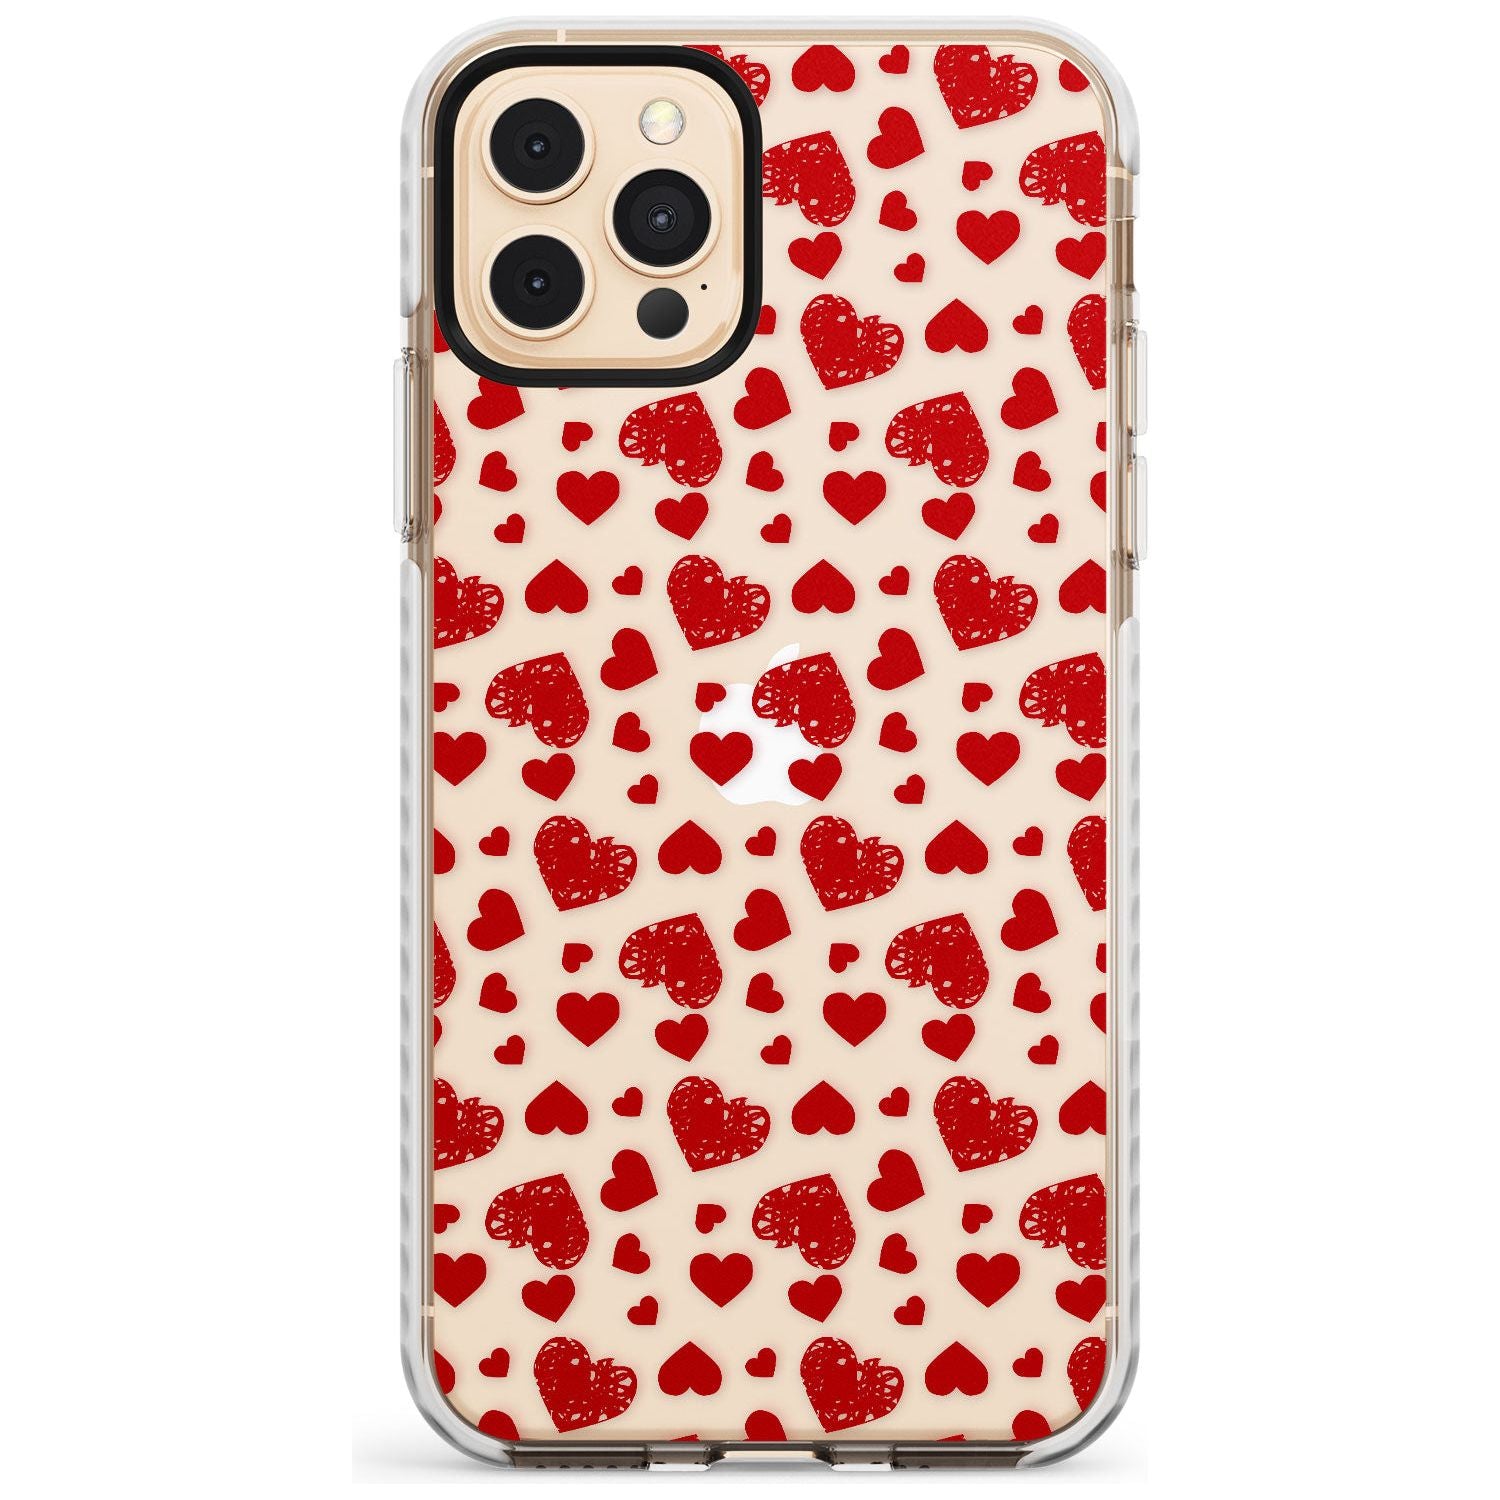 Sketched Heart Pattern Slim TPU Phone Case for iPhone 11 Pro Max